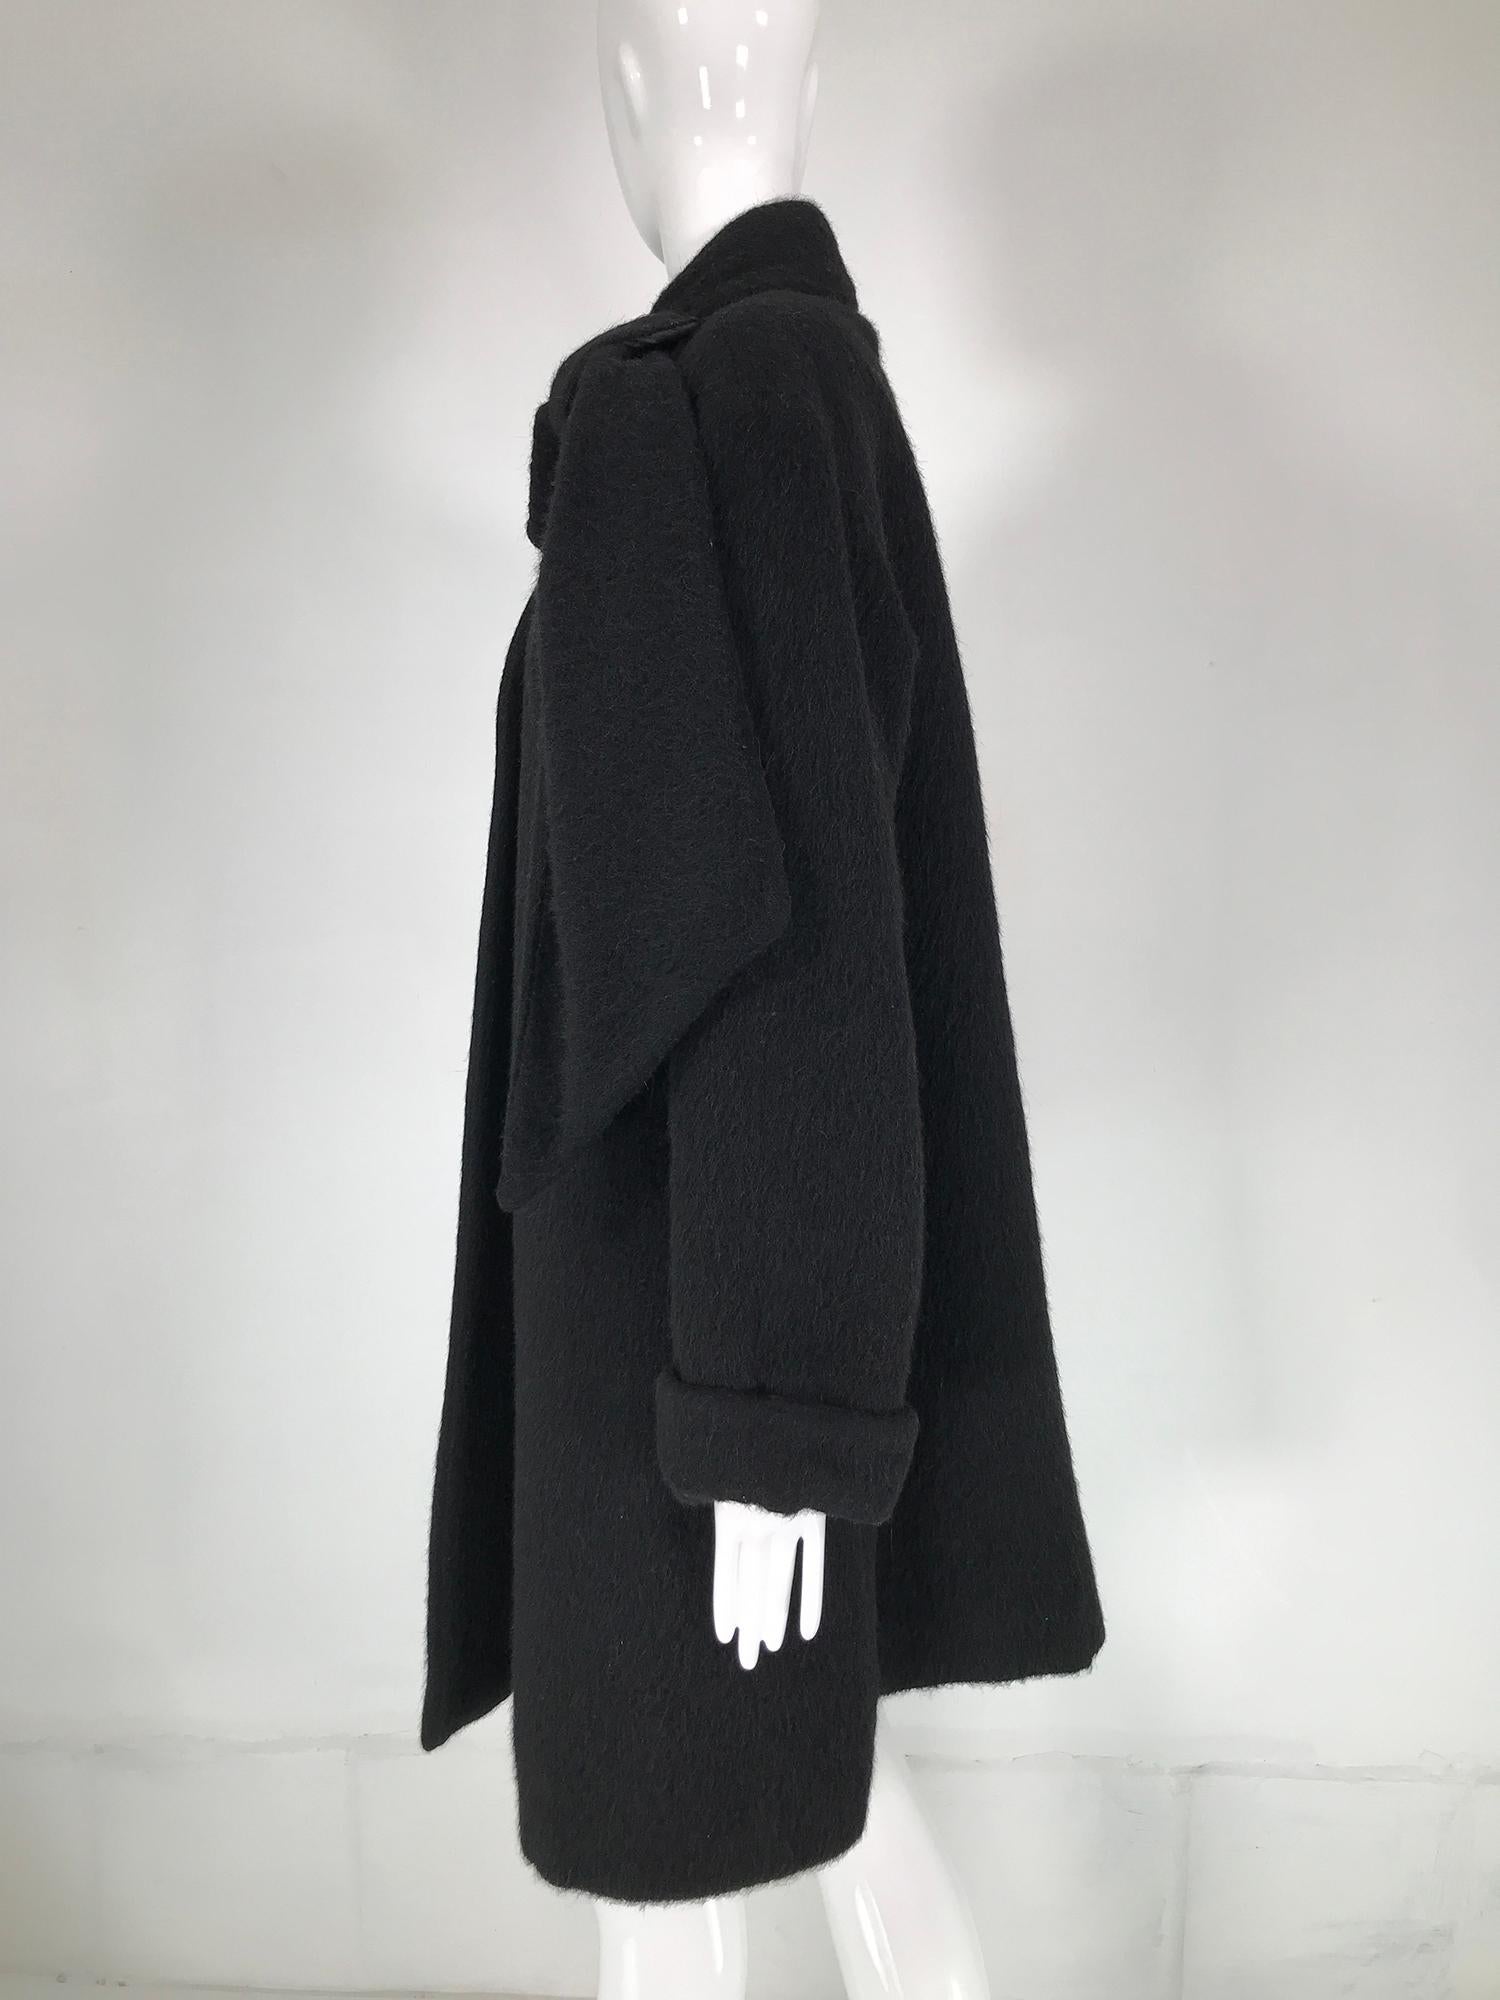 Women's Christian Dior Charcoal Grey Mohair & Wool Winter Coat 1980s For Sale